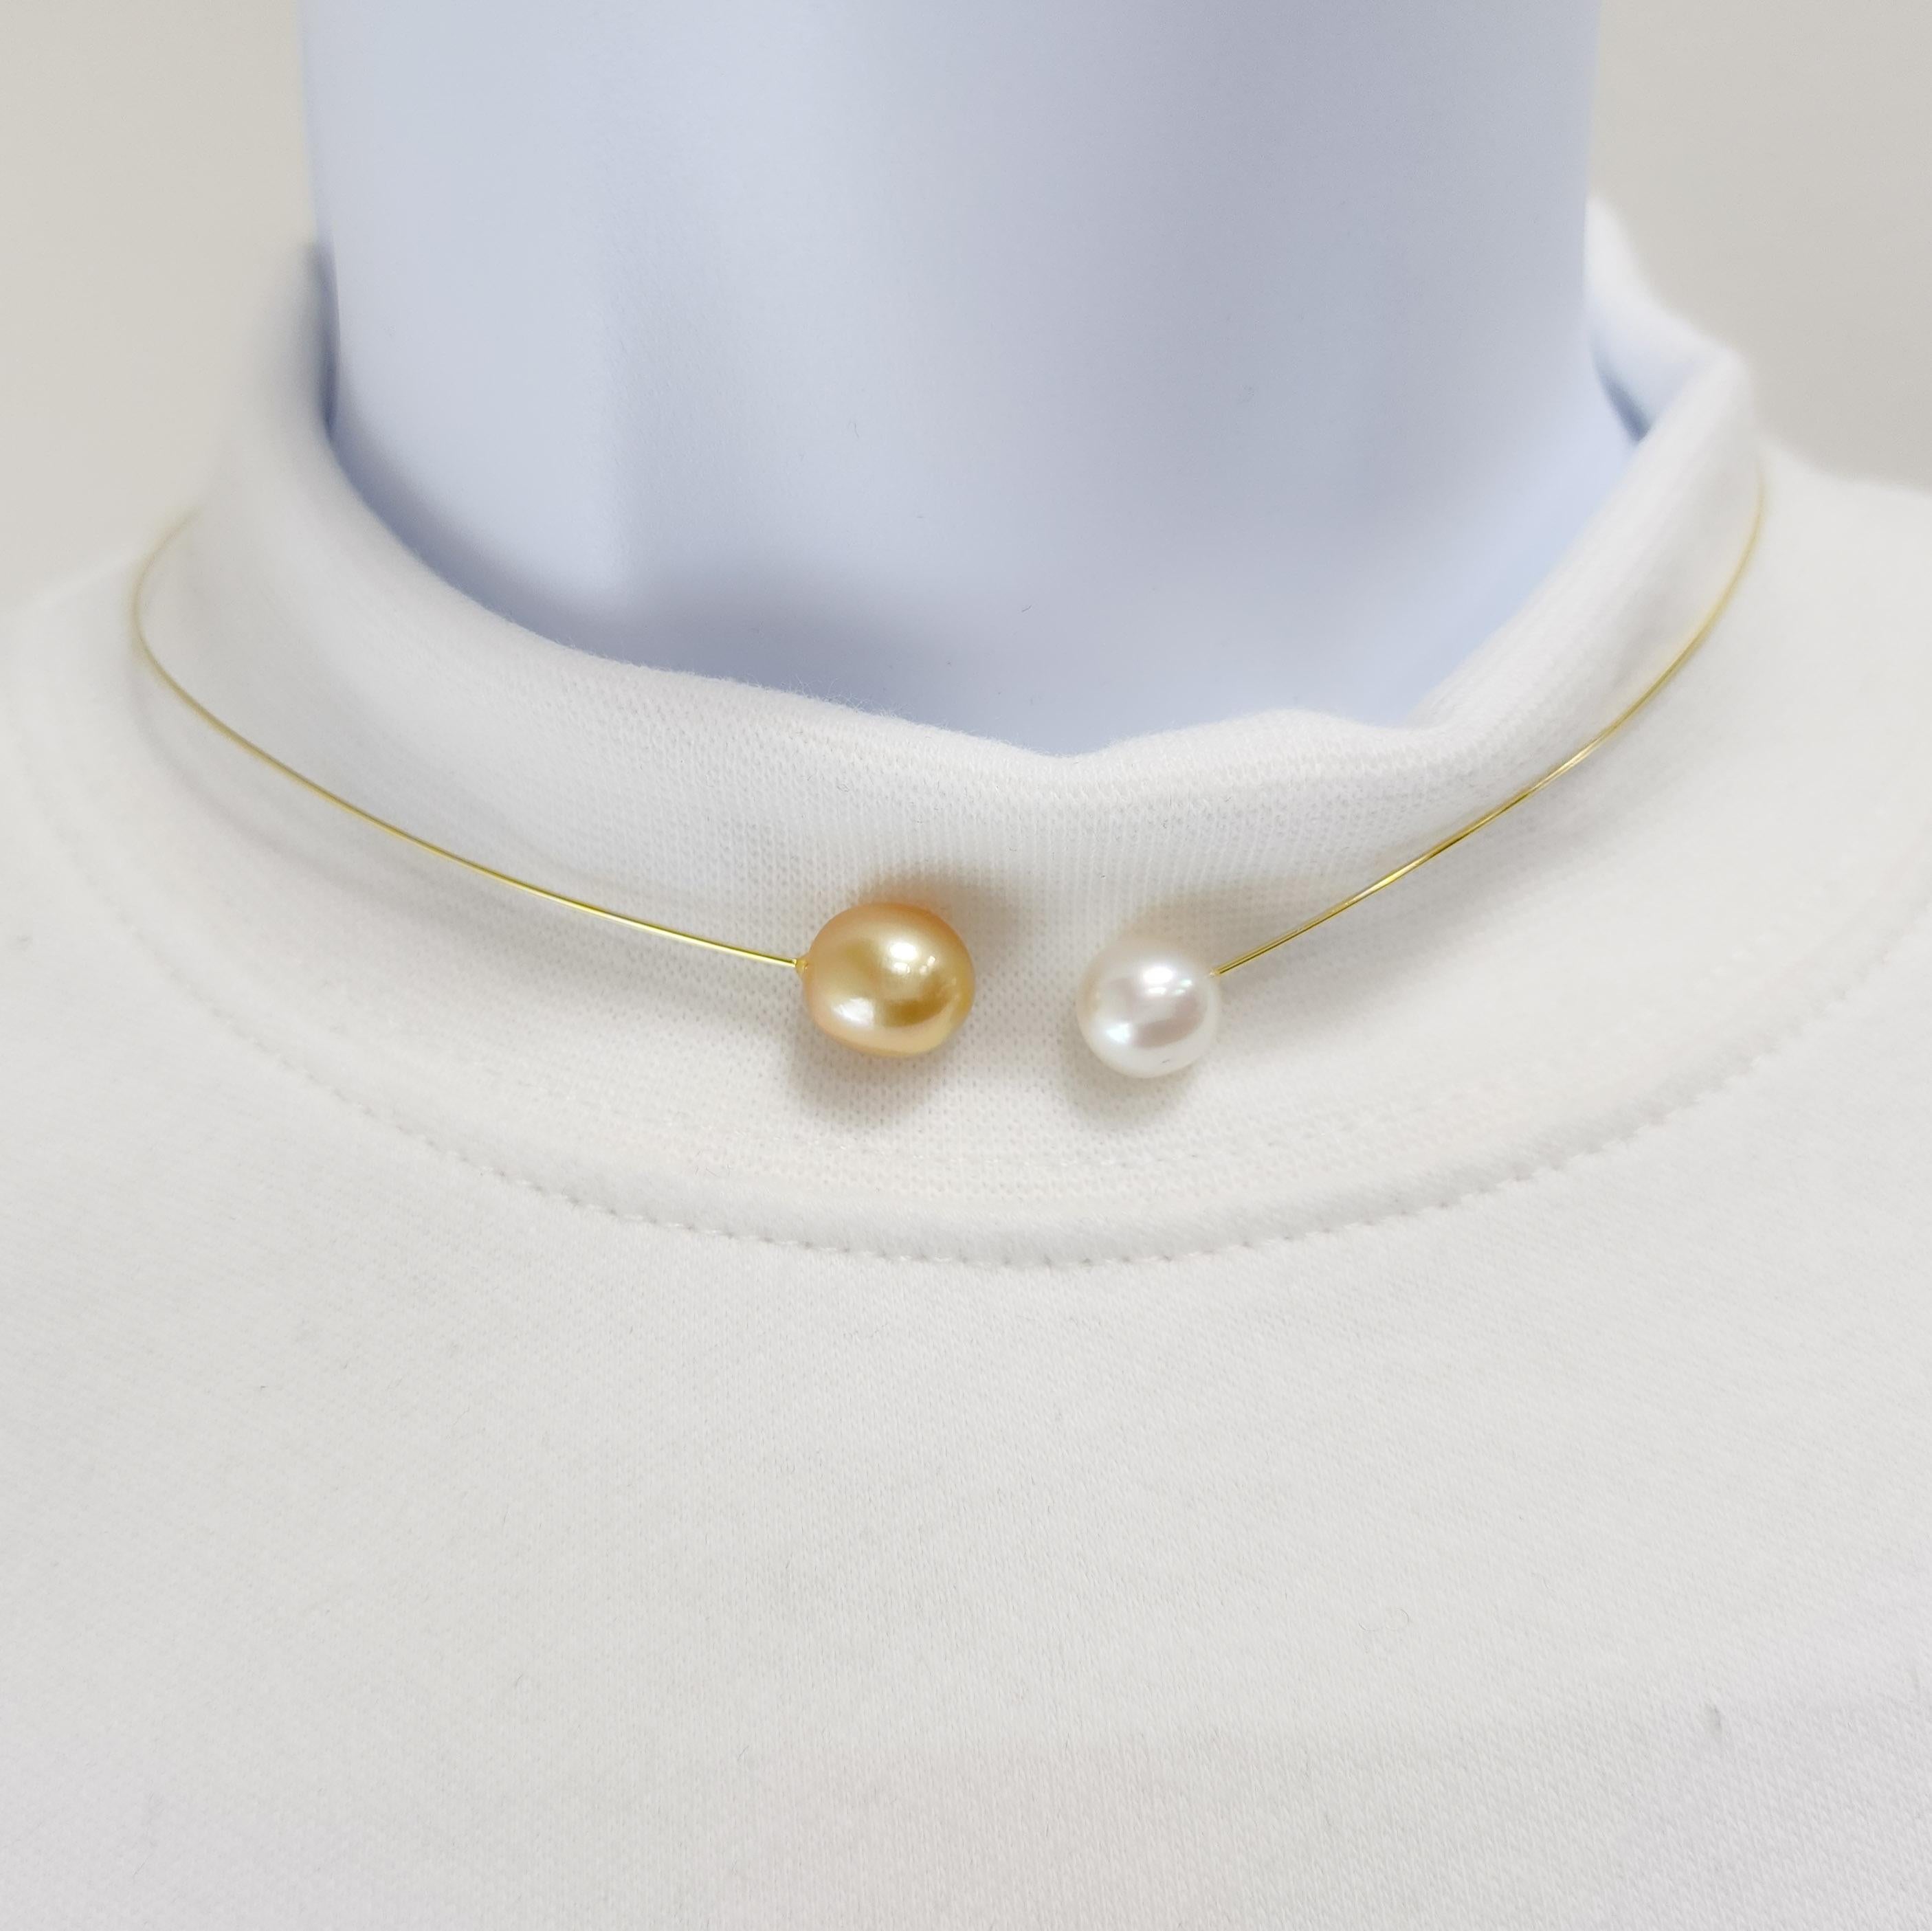 A very fun and modern necklace featuring a 9-10 mm golden pearl and white pearl.  Handmade in 18k yellow gold wire.  Flexible and easy to wear for any neck size.